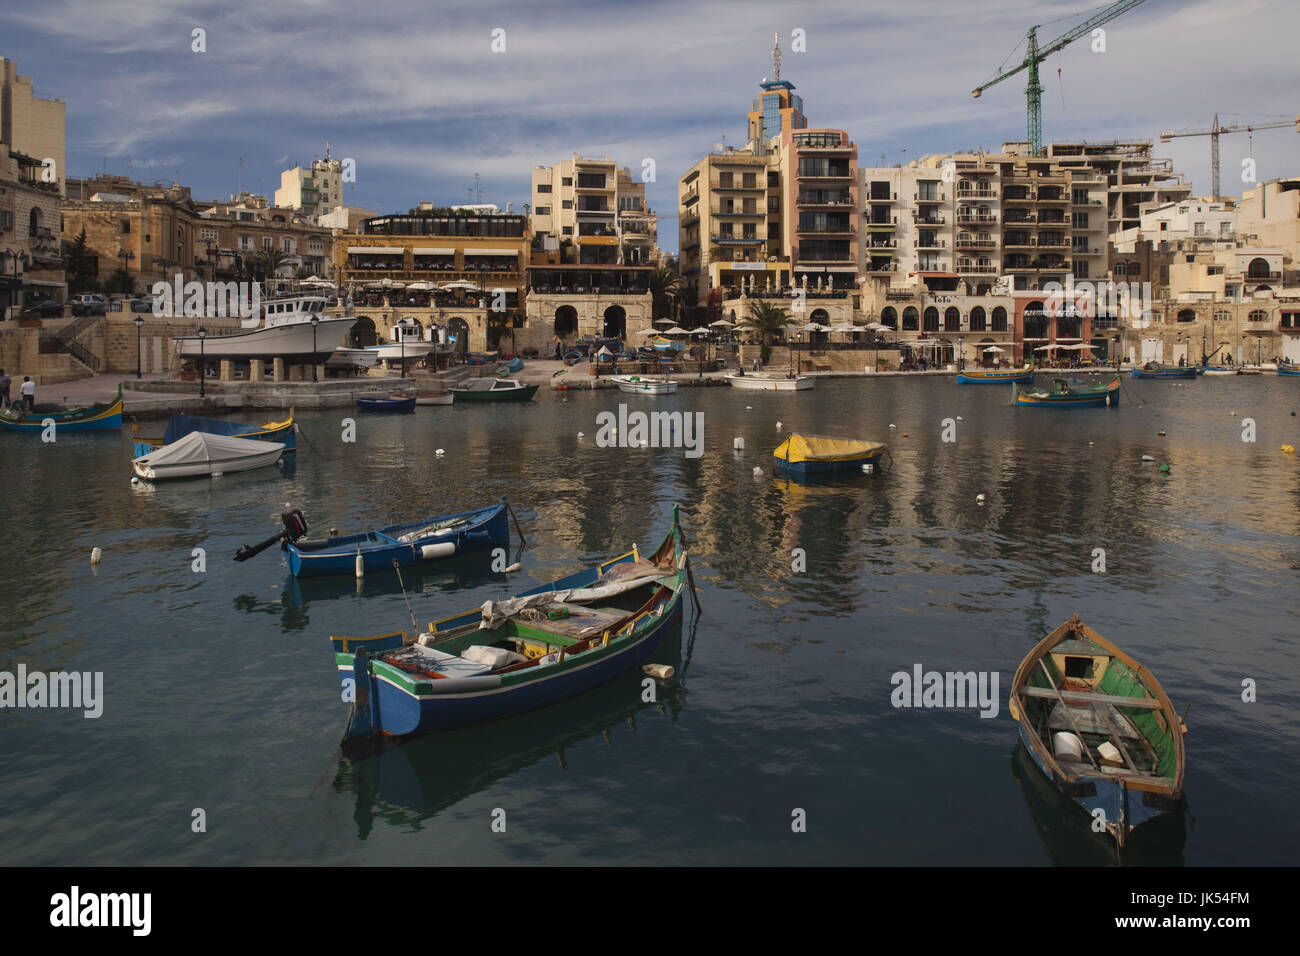 Malta, Valletta, St. Julian's, cafes and buildings of the Spinola Bay area Stock Photo